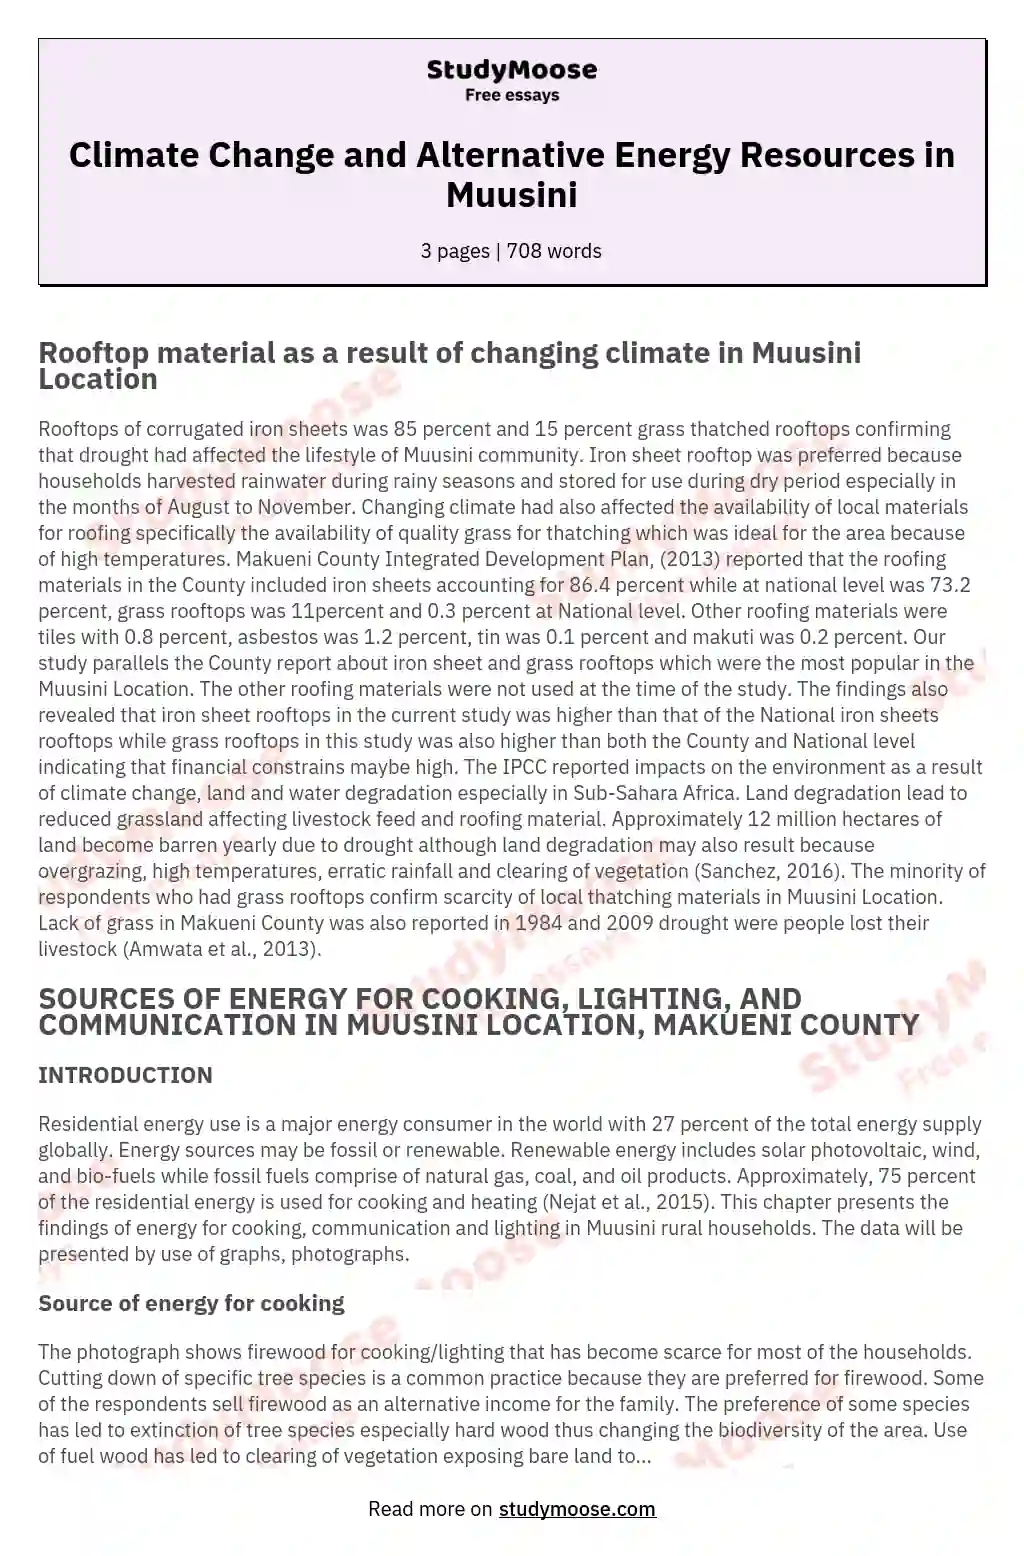 Climate Change and Alternative Energy Resources in Muusini